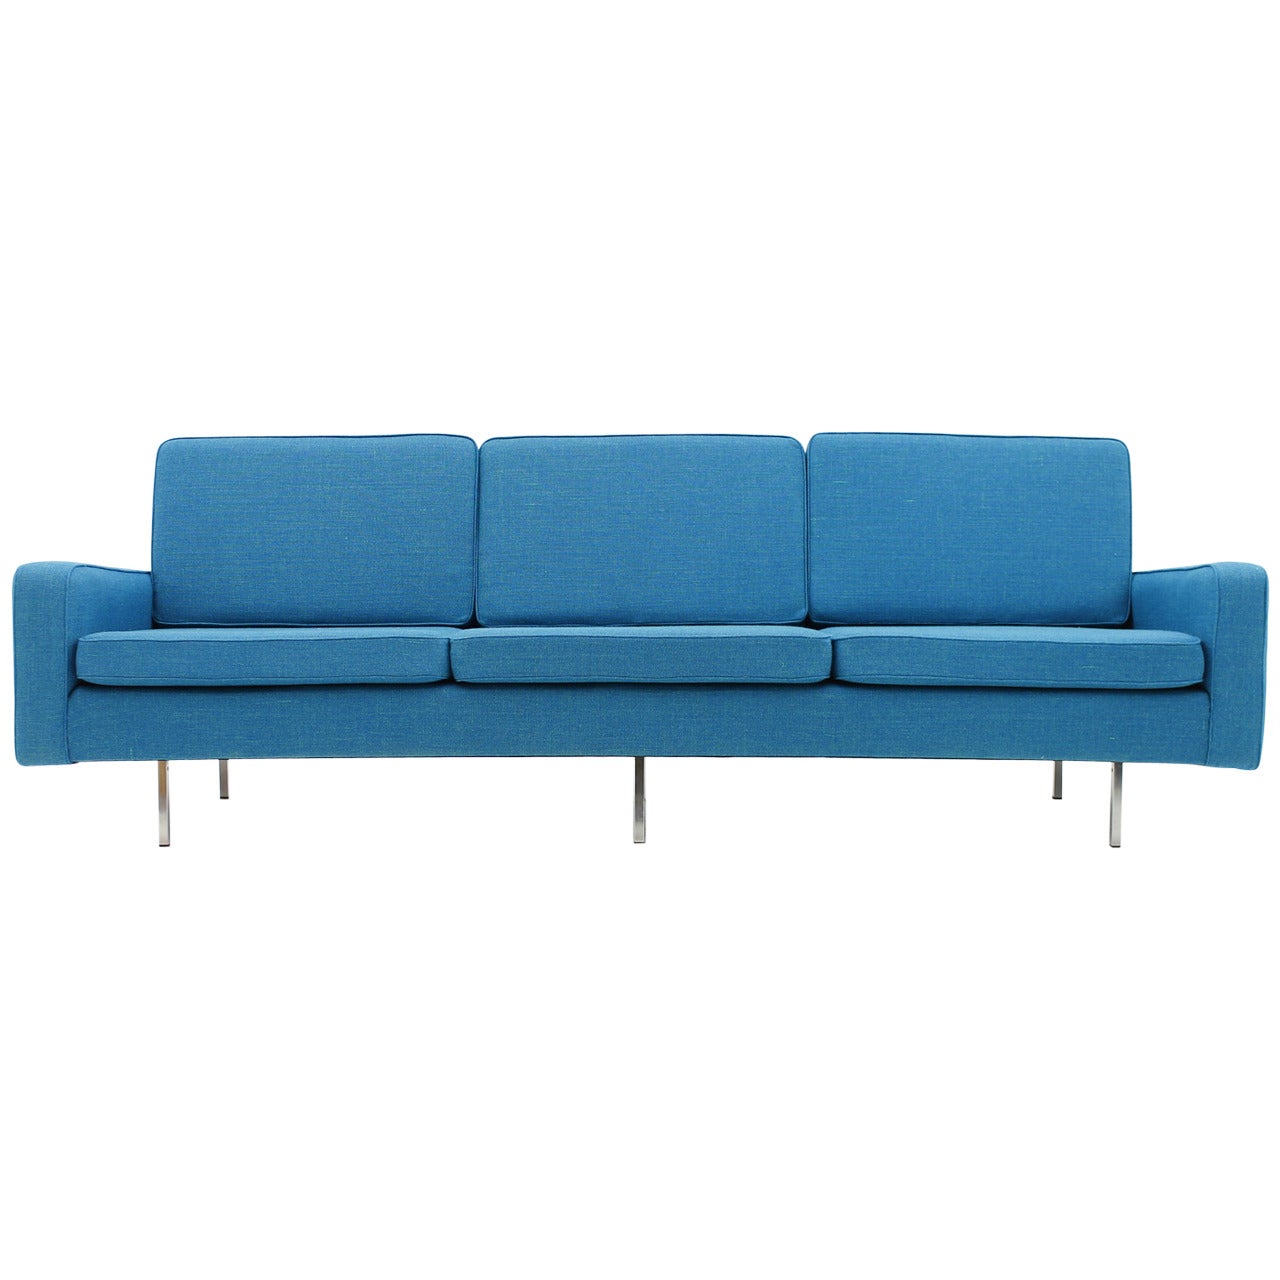 Three-Seat Sofa by Florence Knoll for Knoll International, 1949